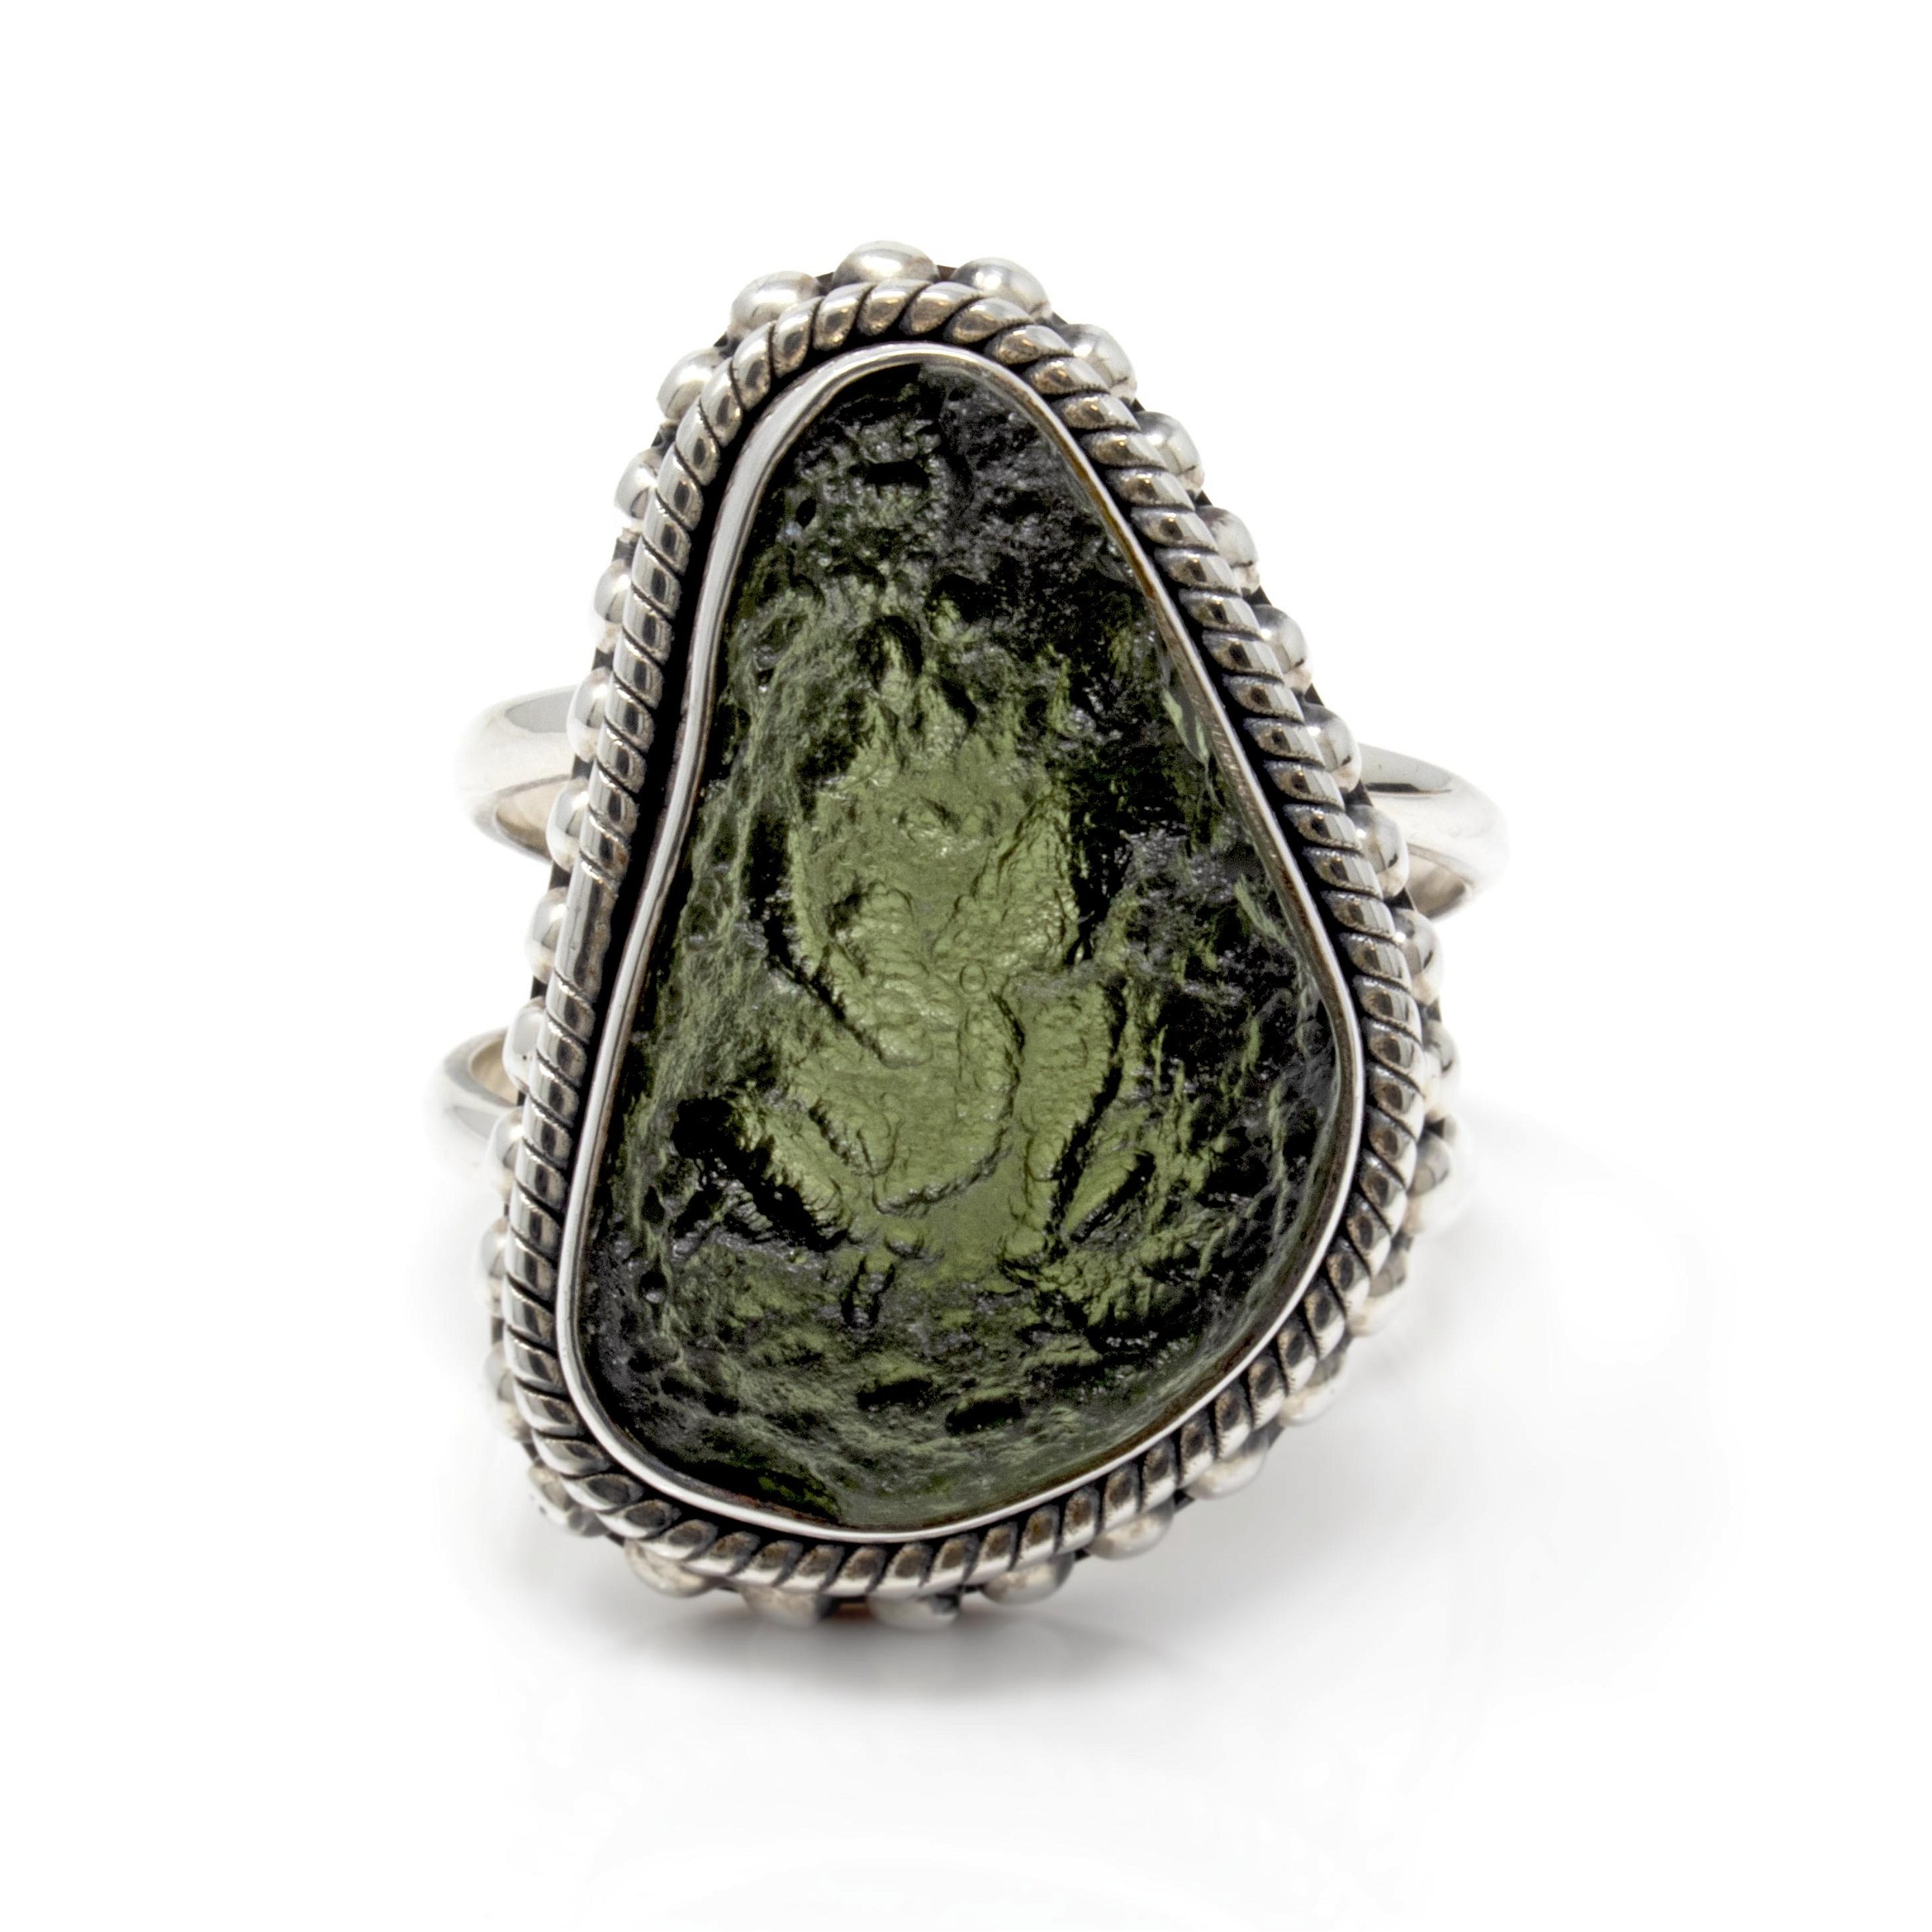 Moldavite Ring Size 10 - Freeform With Silver Rope And Beads Around Bezel Set On Double Band